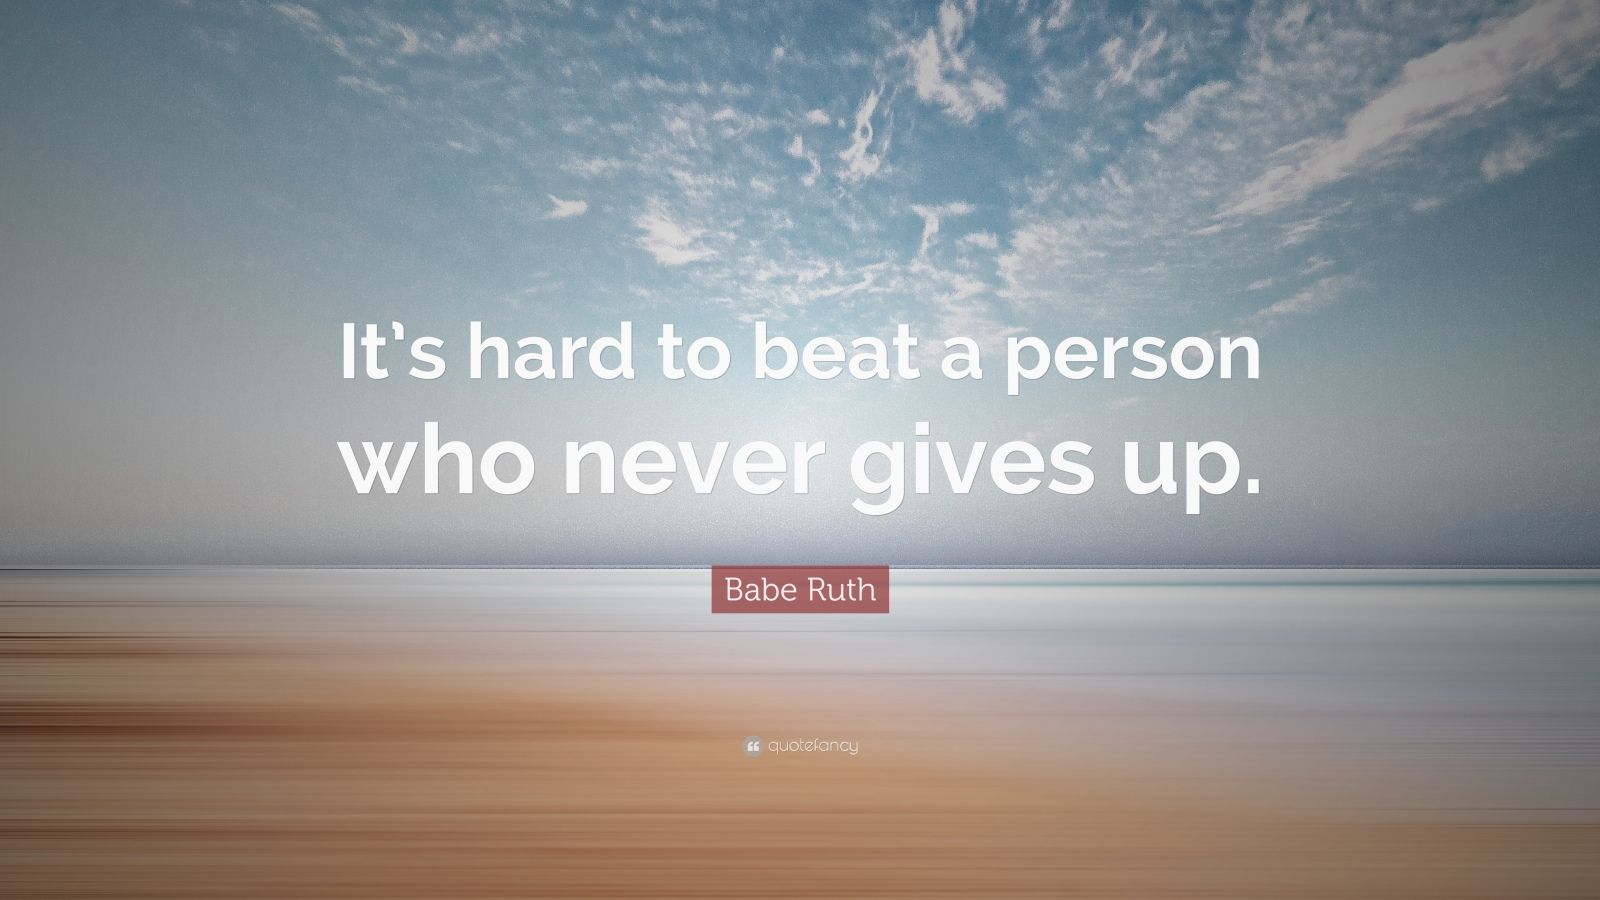 Babe Ruth Quote: “It’s hard to beat a person who never gives up.” (26 wallpapers ...1600 x 900